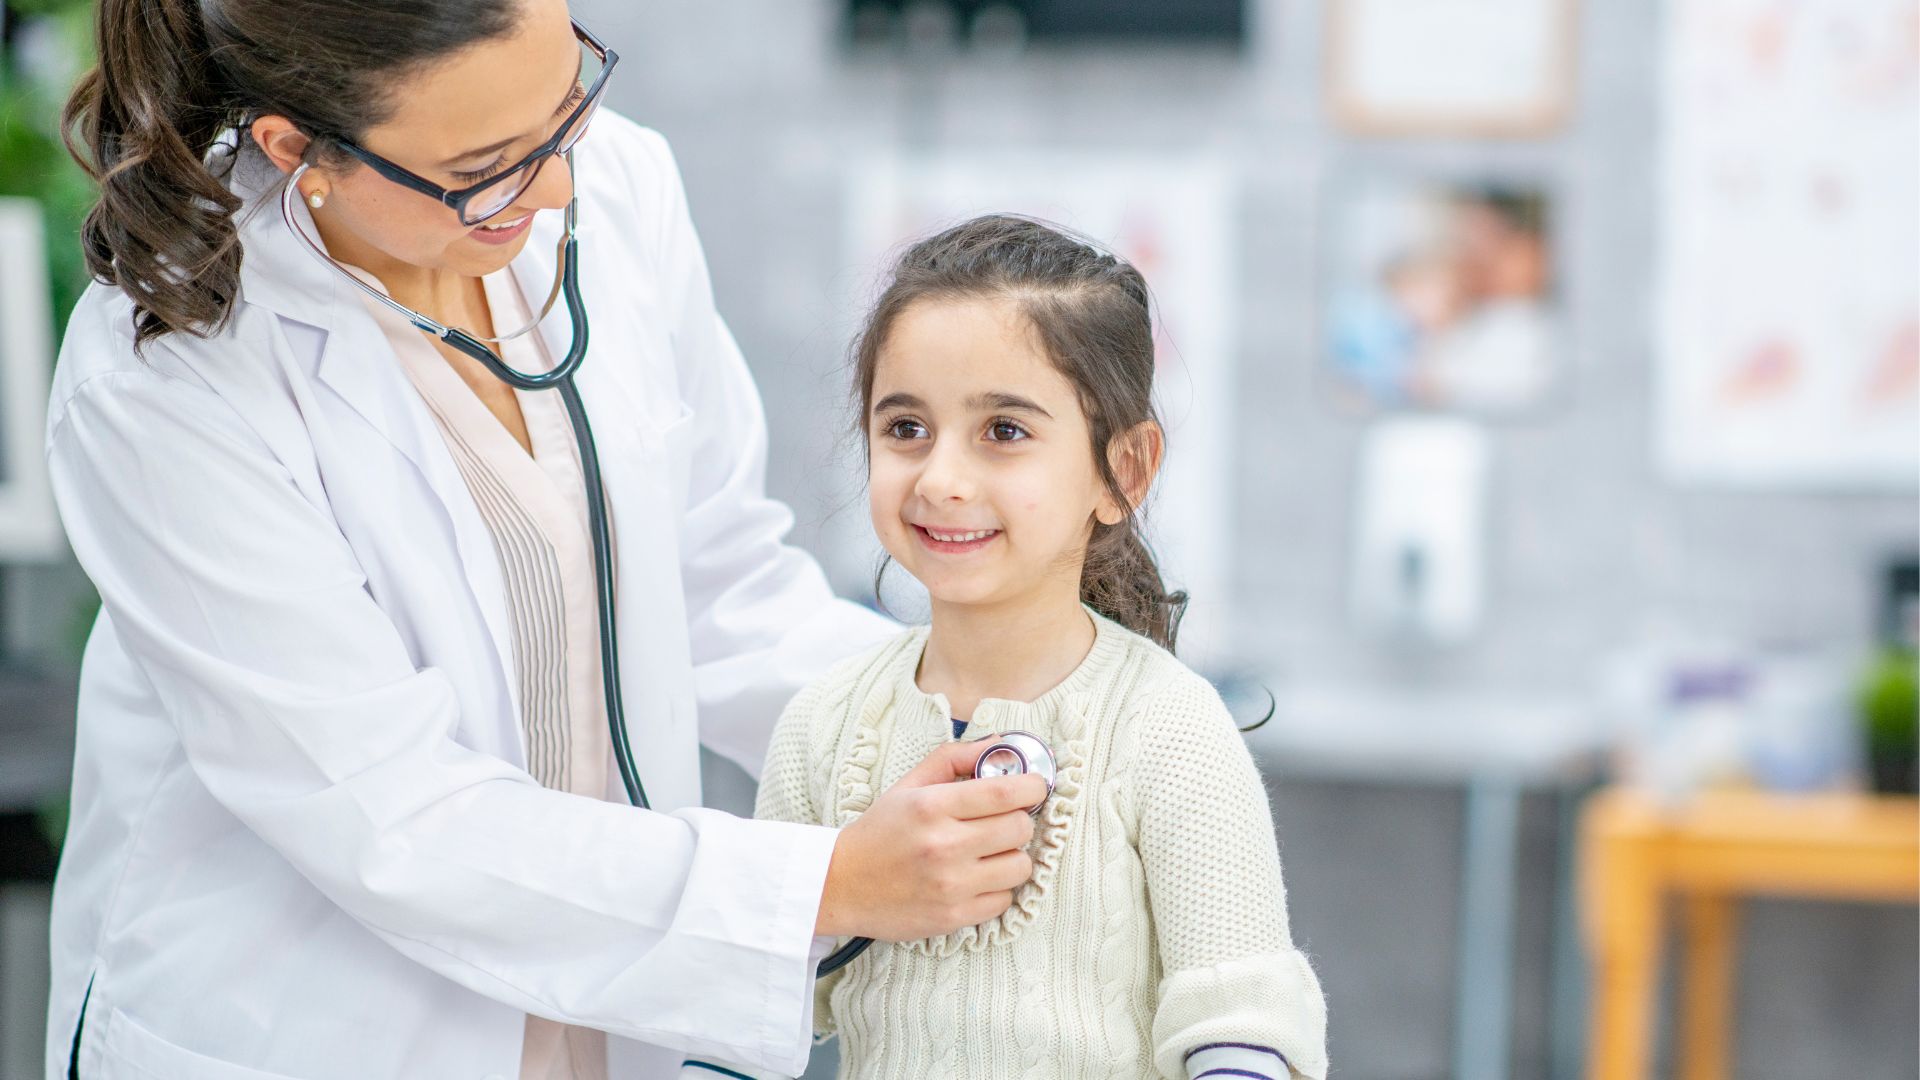 A pediatric cardiologist examines the child.